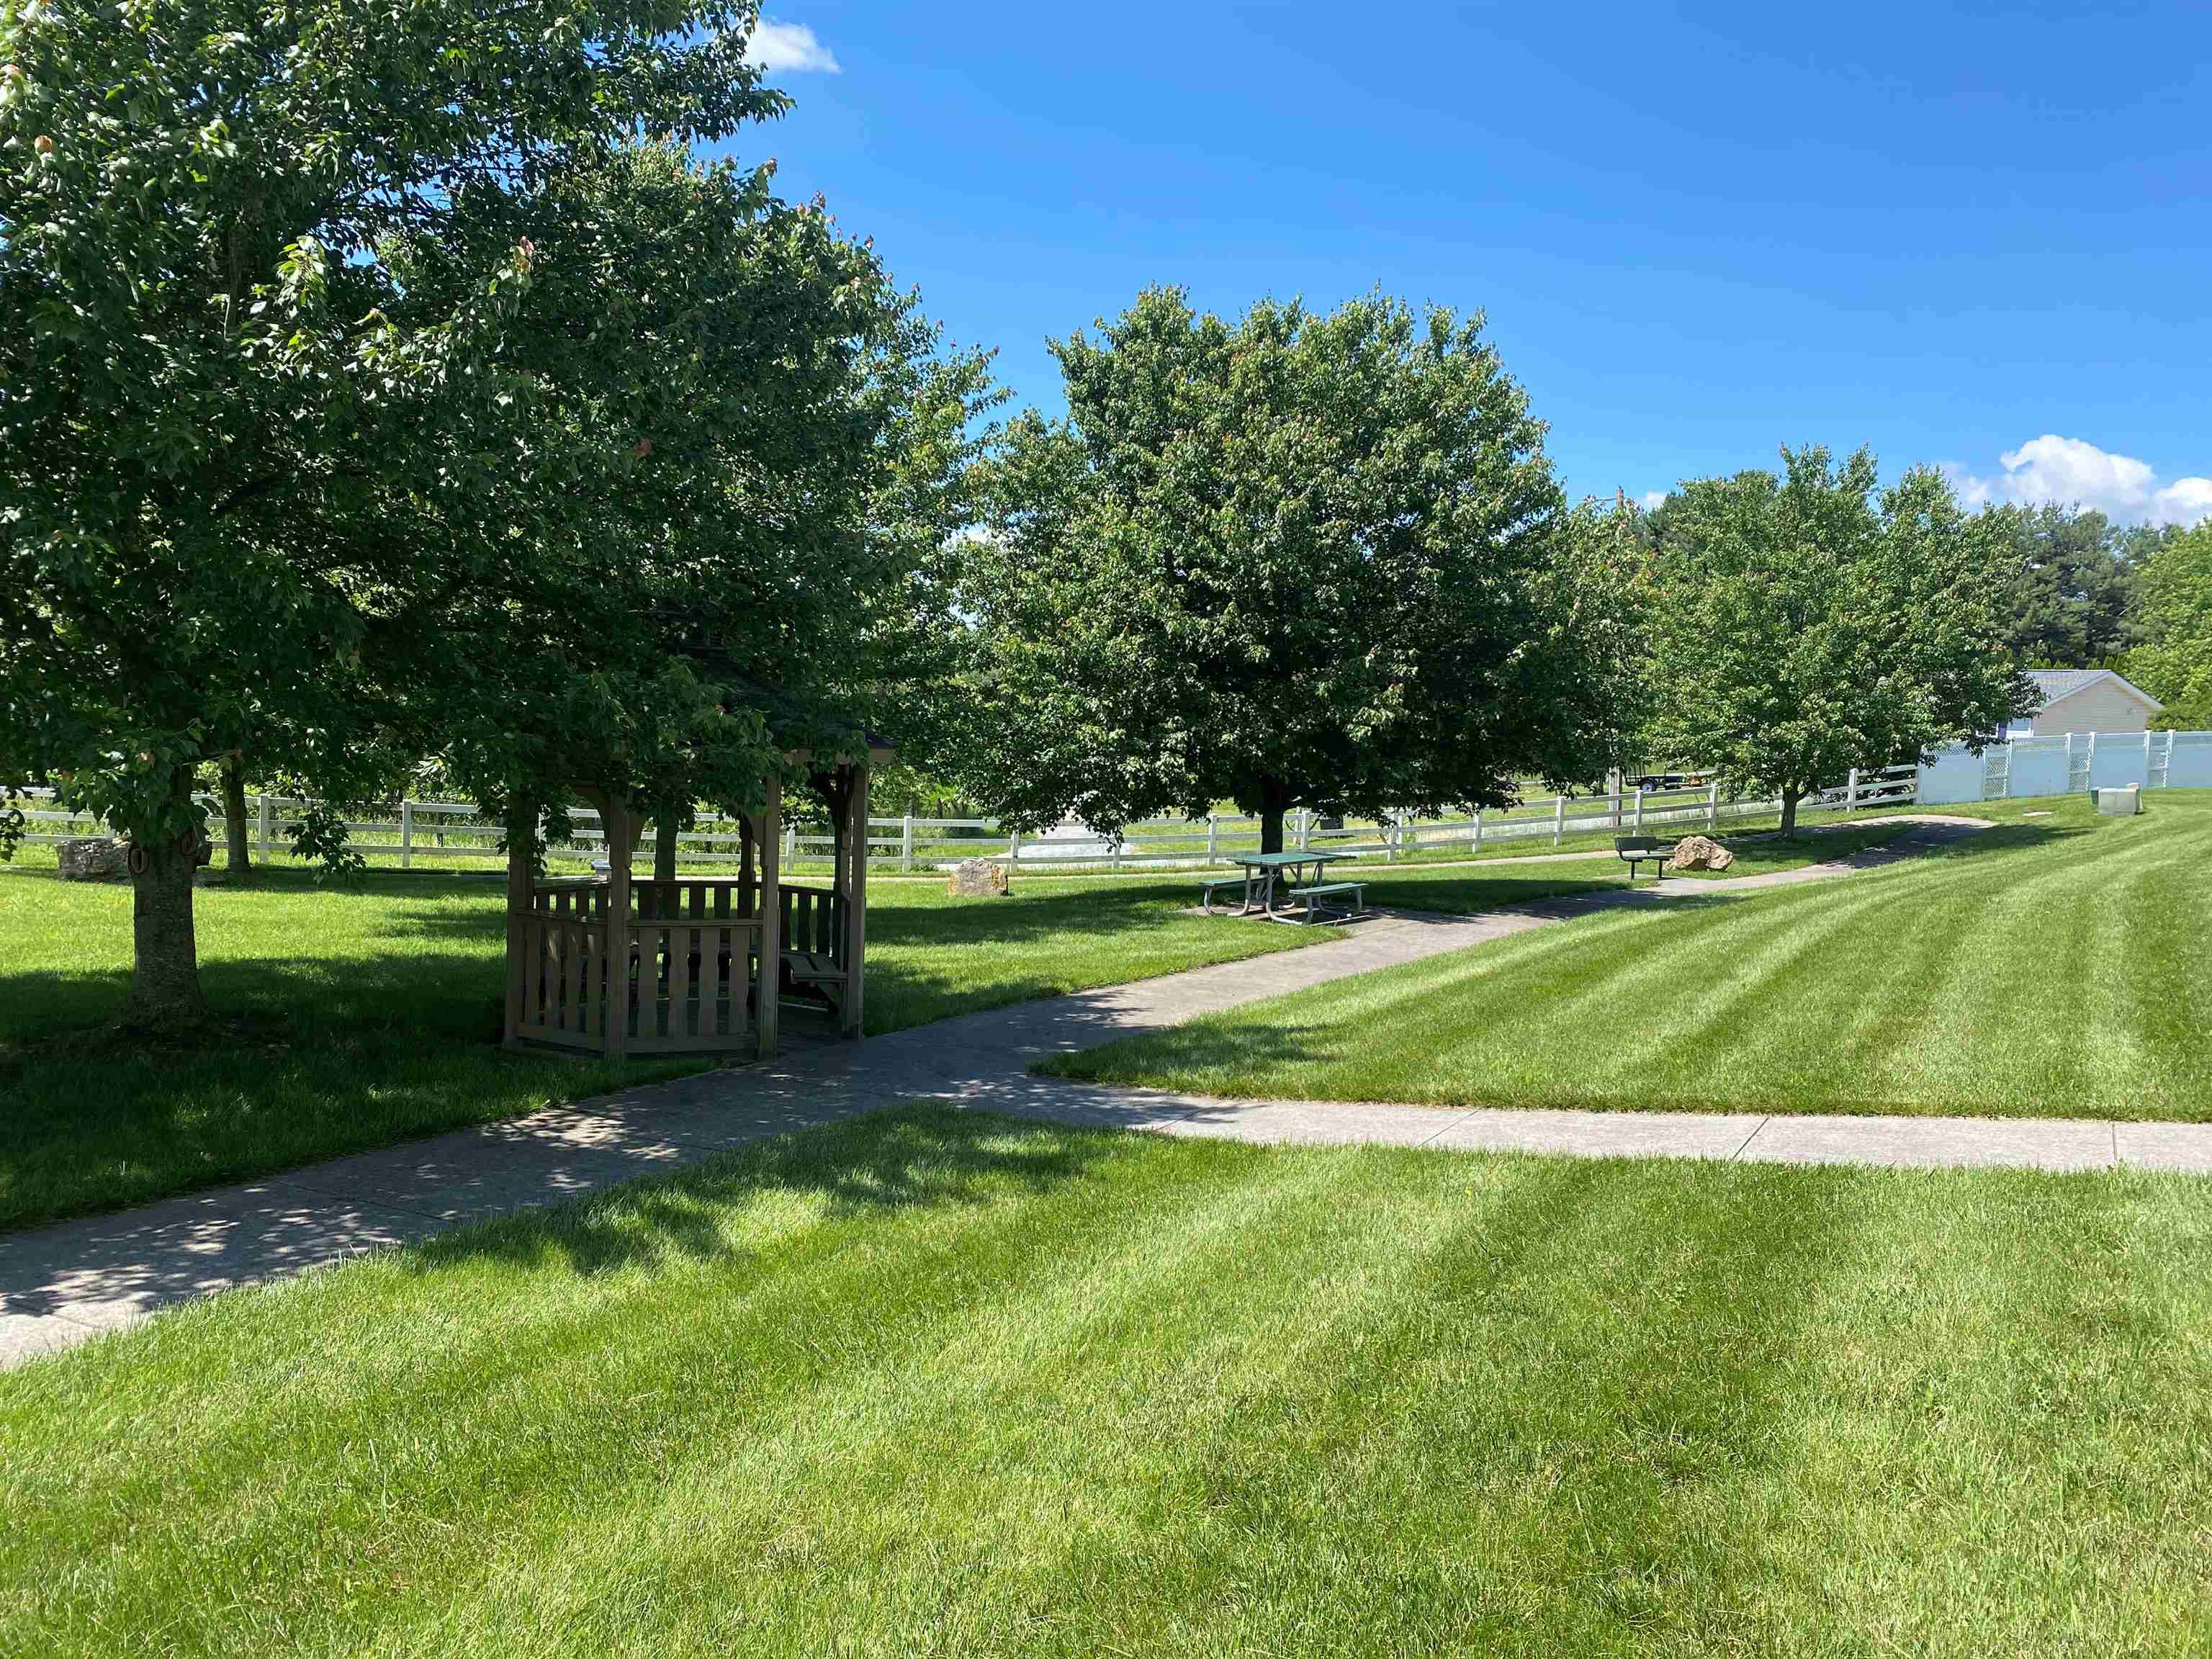 Stroll down the sideway to the subdivision's community park. Enjoy the gazebo and nice mountain views